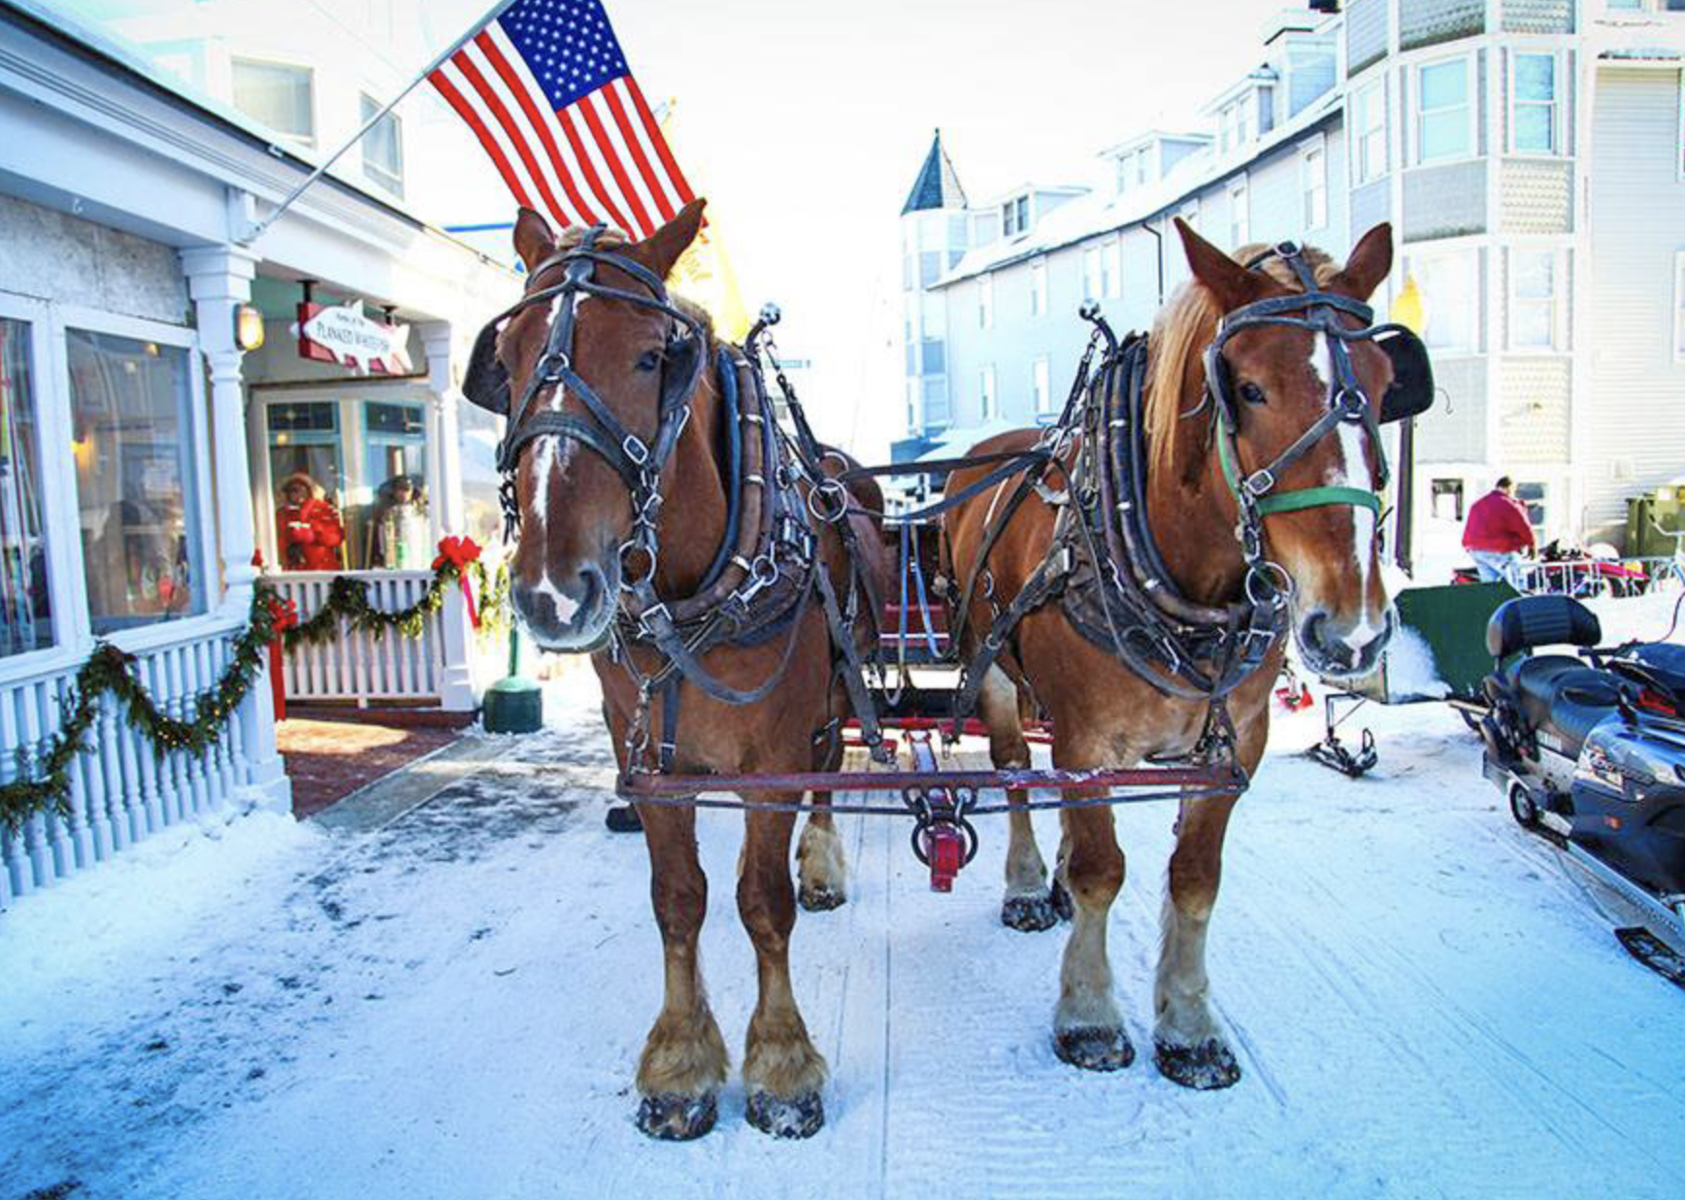 Horse drawn carriage ride with flag in the background